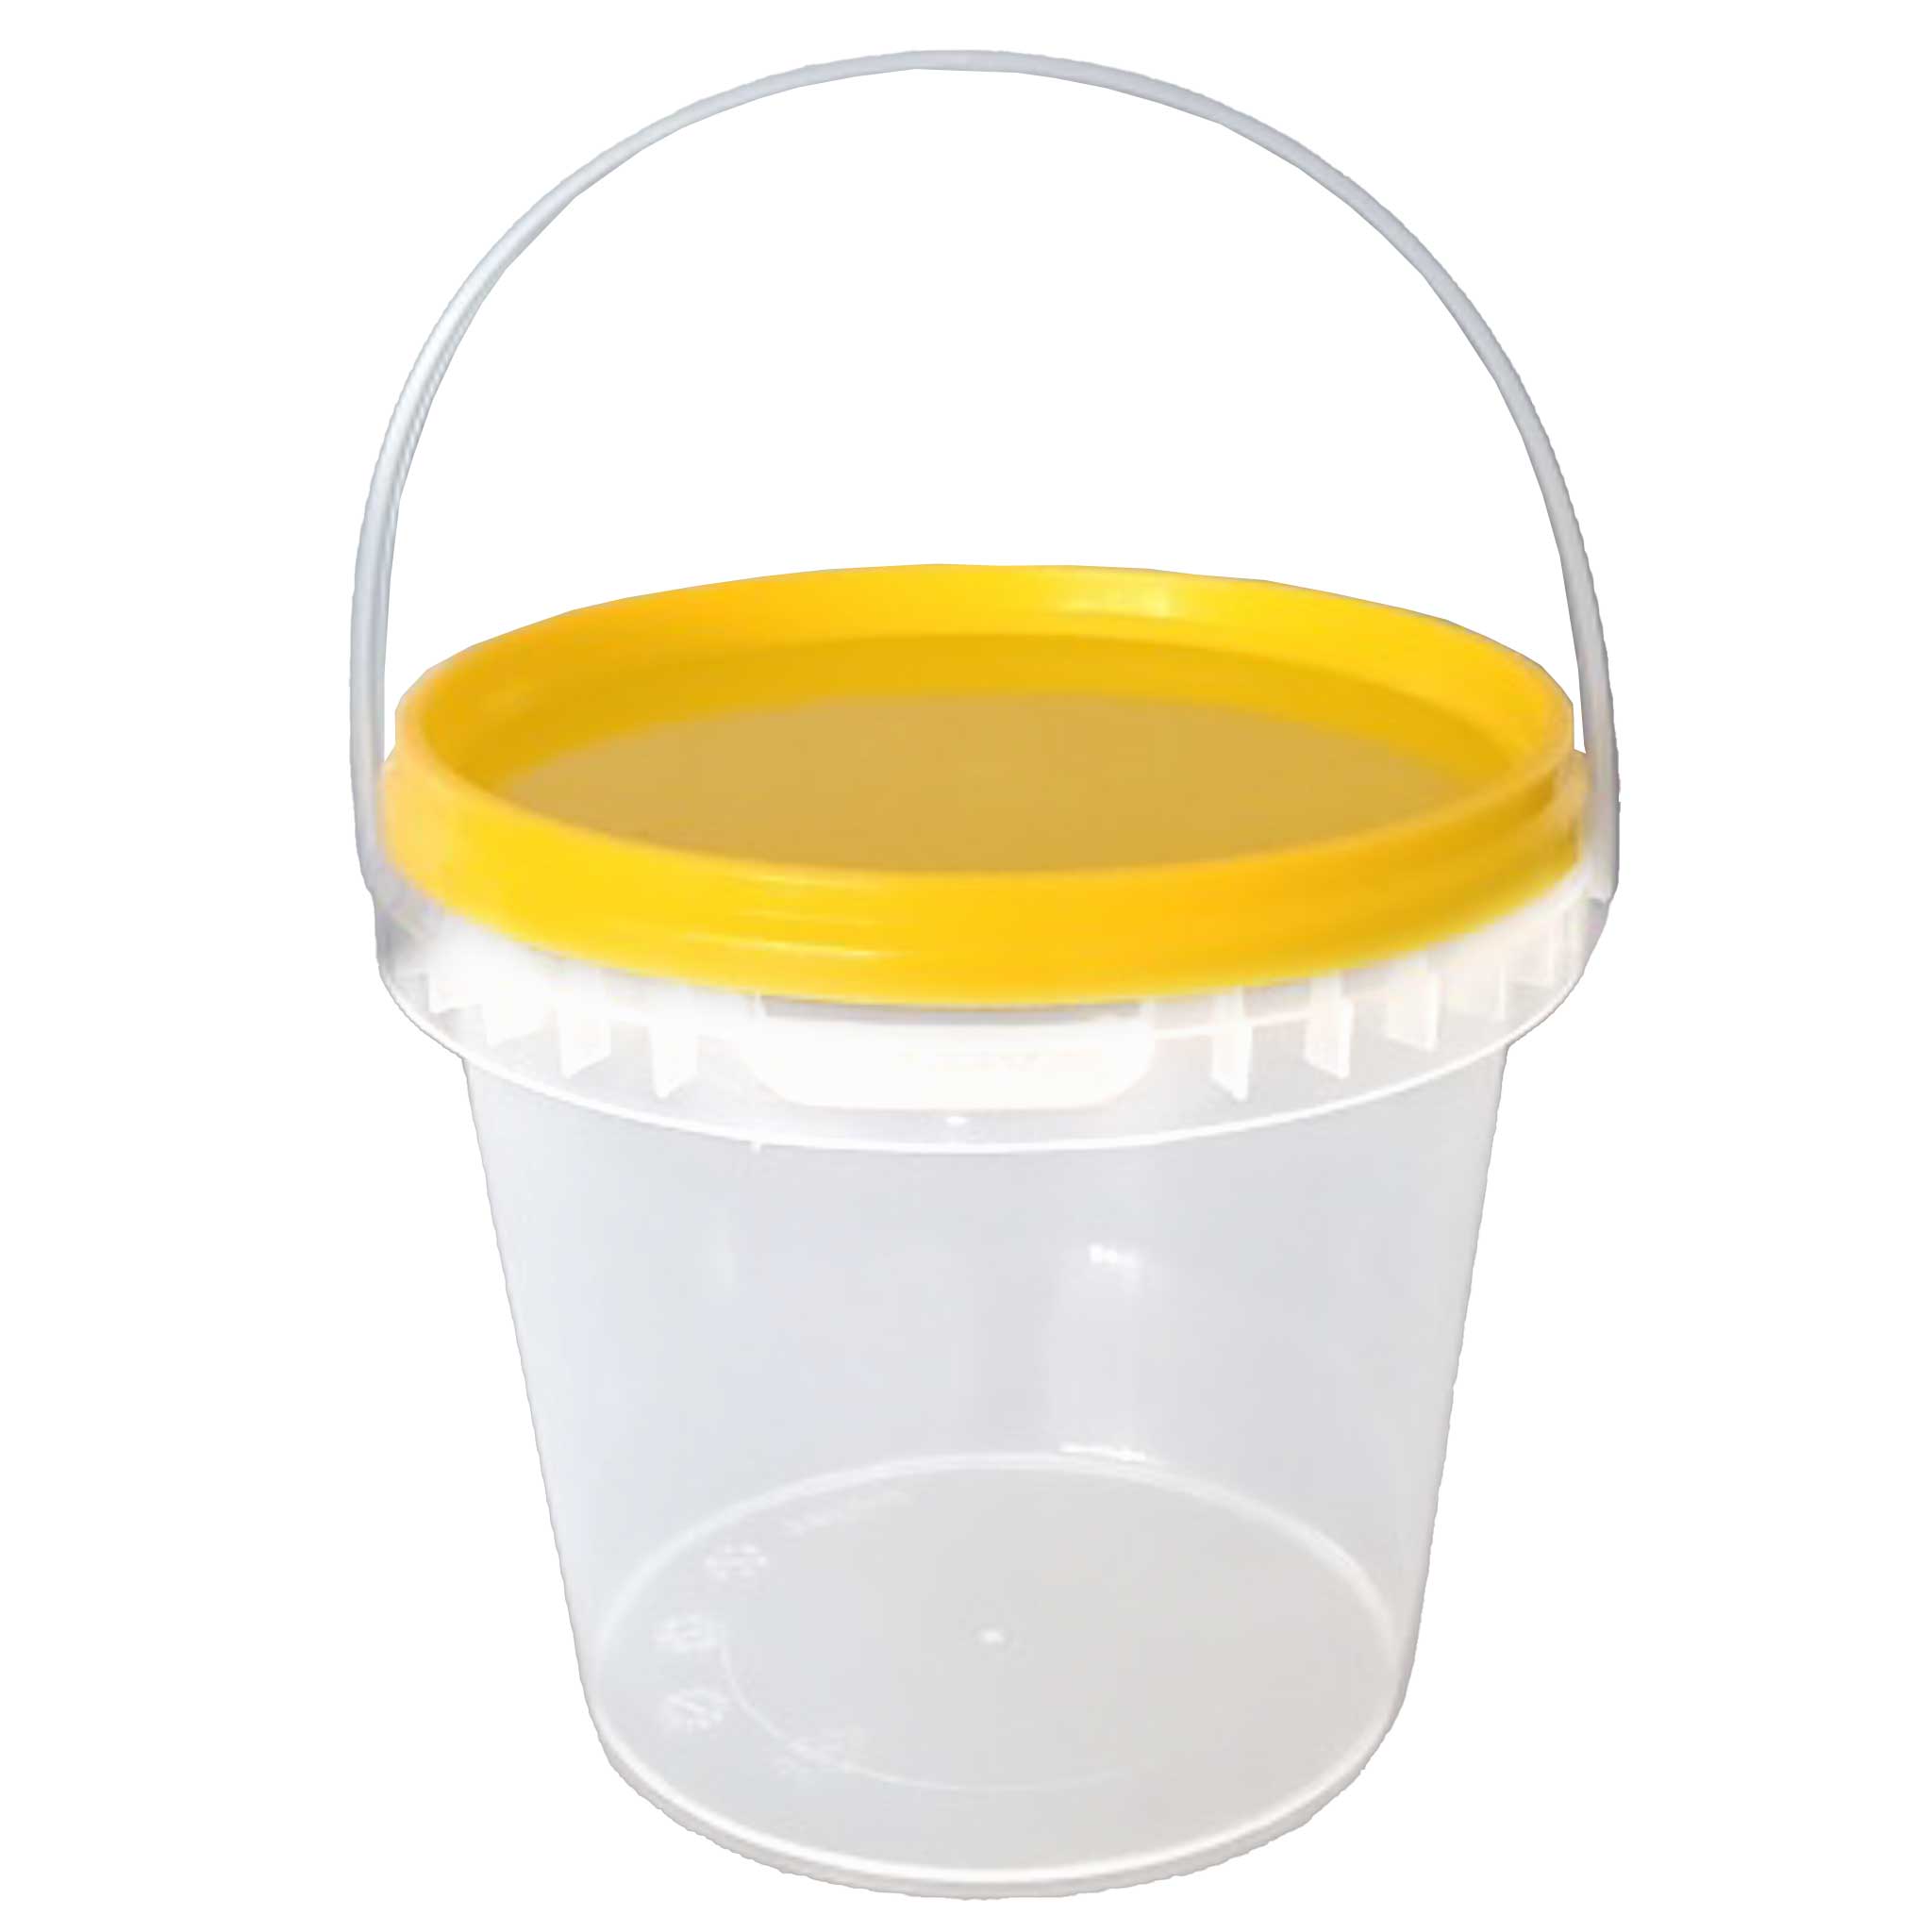 Honey Bucket/Pail/Jar Clear with lid and handle - 730ml/1kg (100 Pack) - Processing collection by Buzzbee Beekeeping Supplies